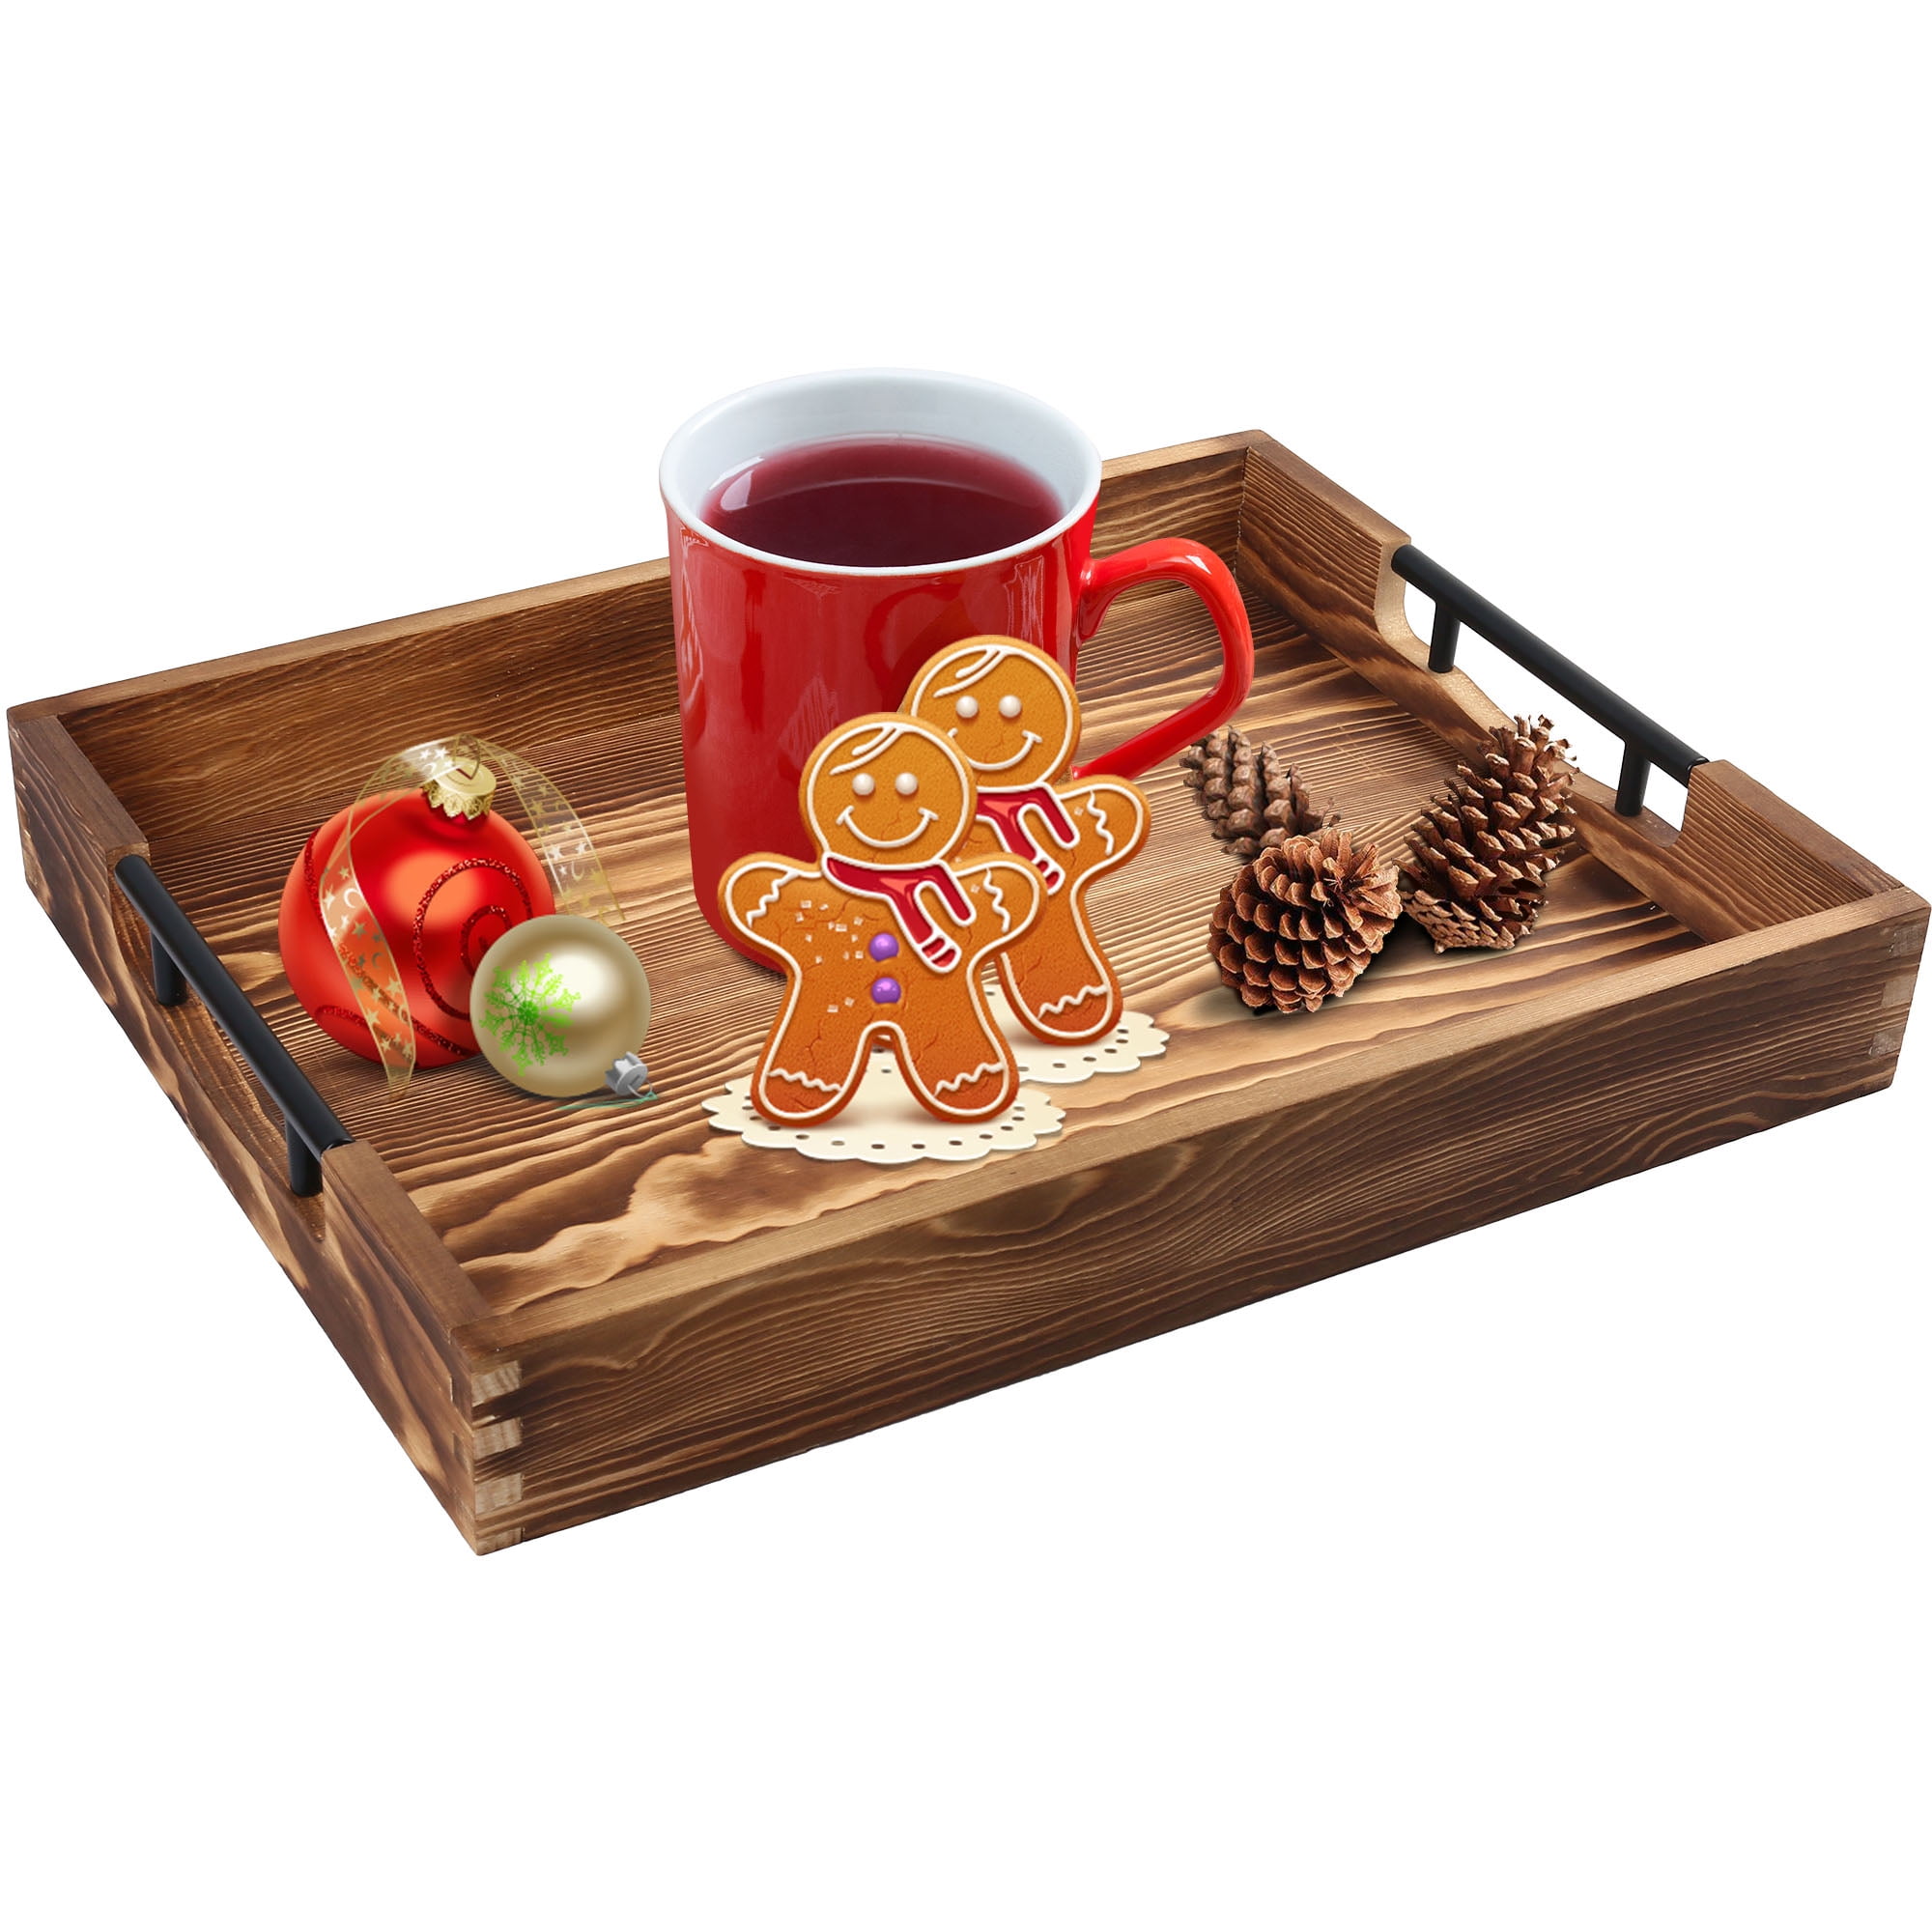 Wooden Serving Tray Large With Handle & 4 Wooden Coasters Ottoman